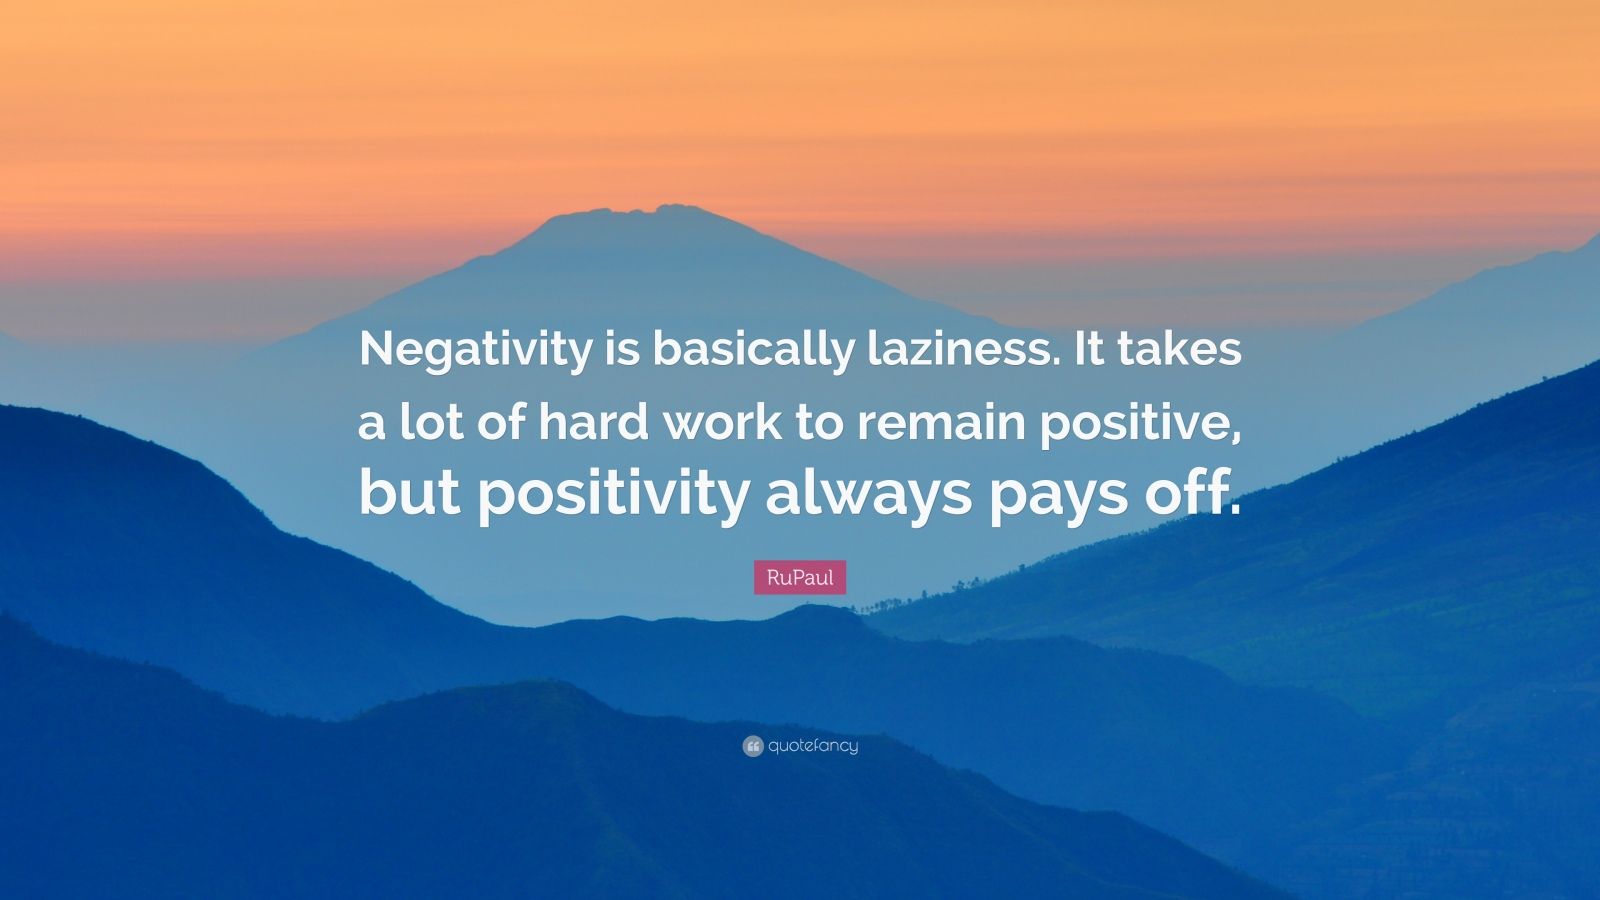 RuPaul Quote: “Negativity is basically laziness. It takes a lot of hard